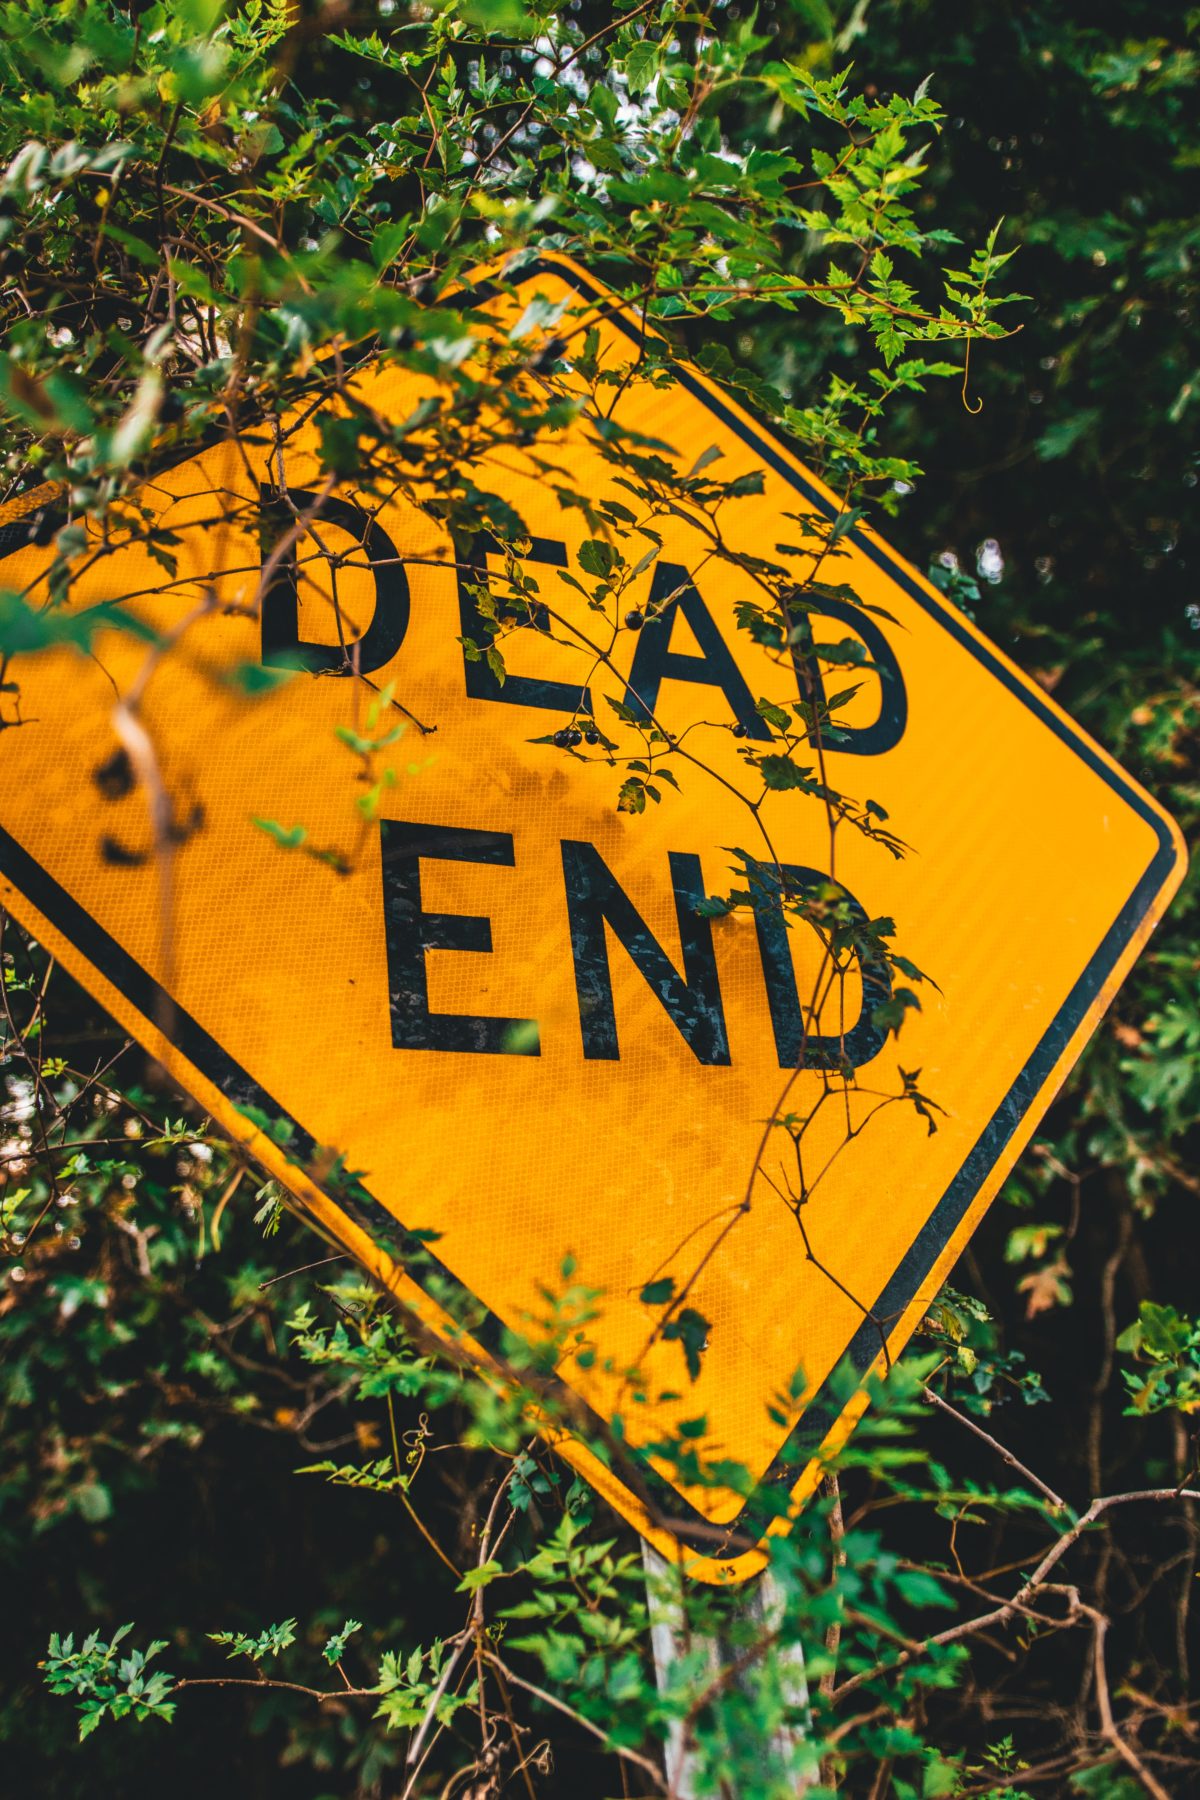 Yellow Dead End sign.